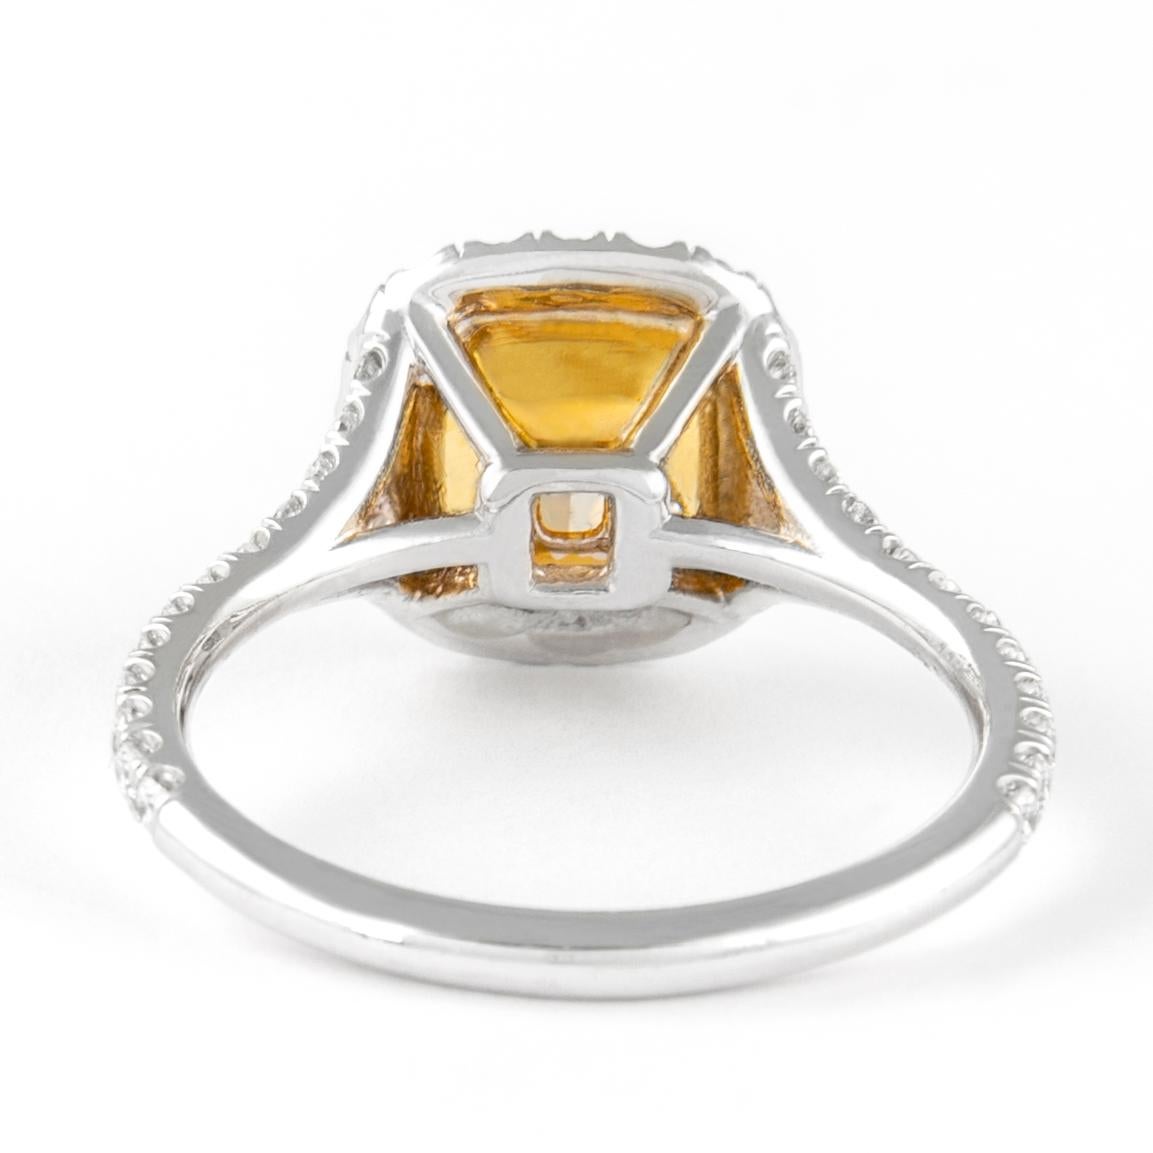 Alexander 2.07ct Fancy Intense Yellow VS1 Cushion Diamond with Halo Ring 18k In New Condition For Sale In BEVERLY HILLS, CA